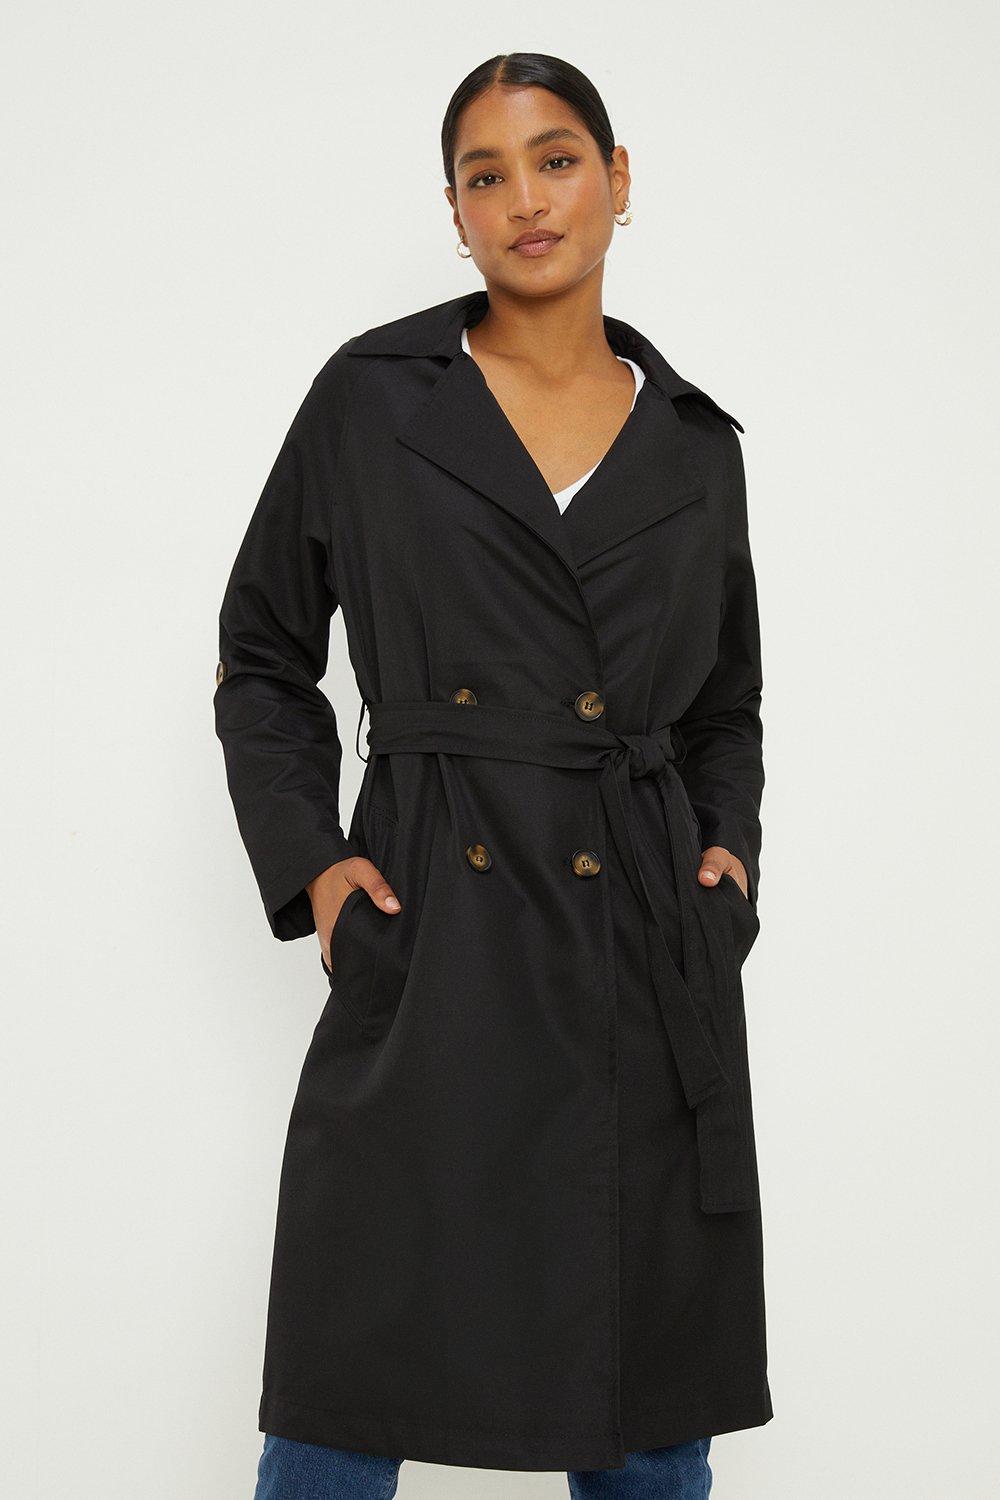 Women’s Button Tab Trench Coat - black - S